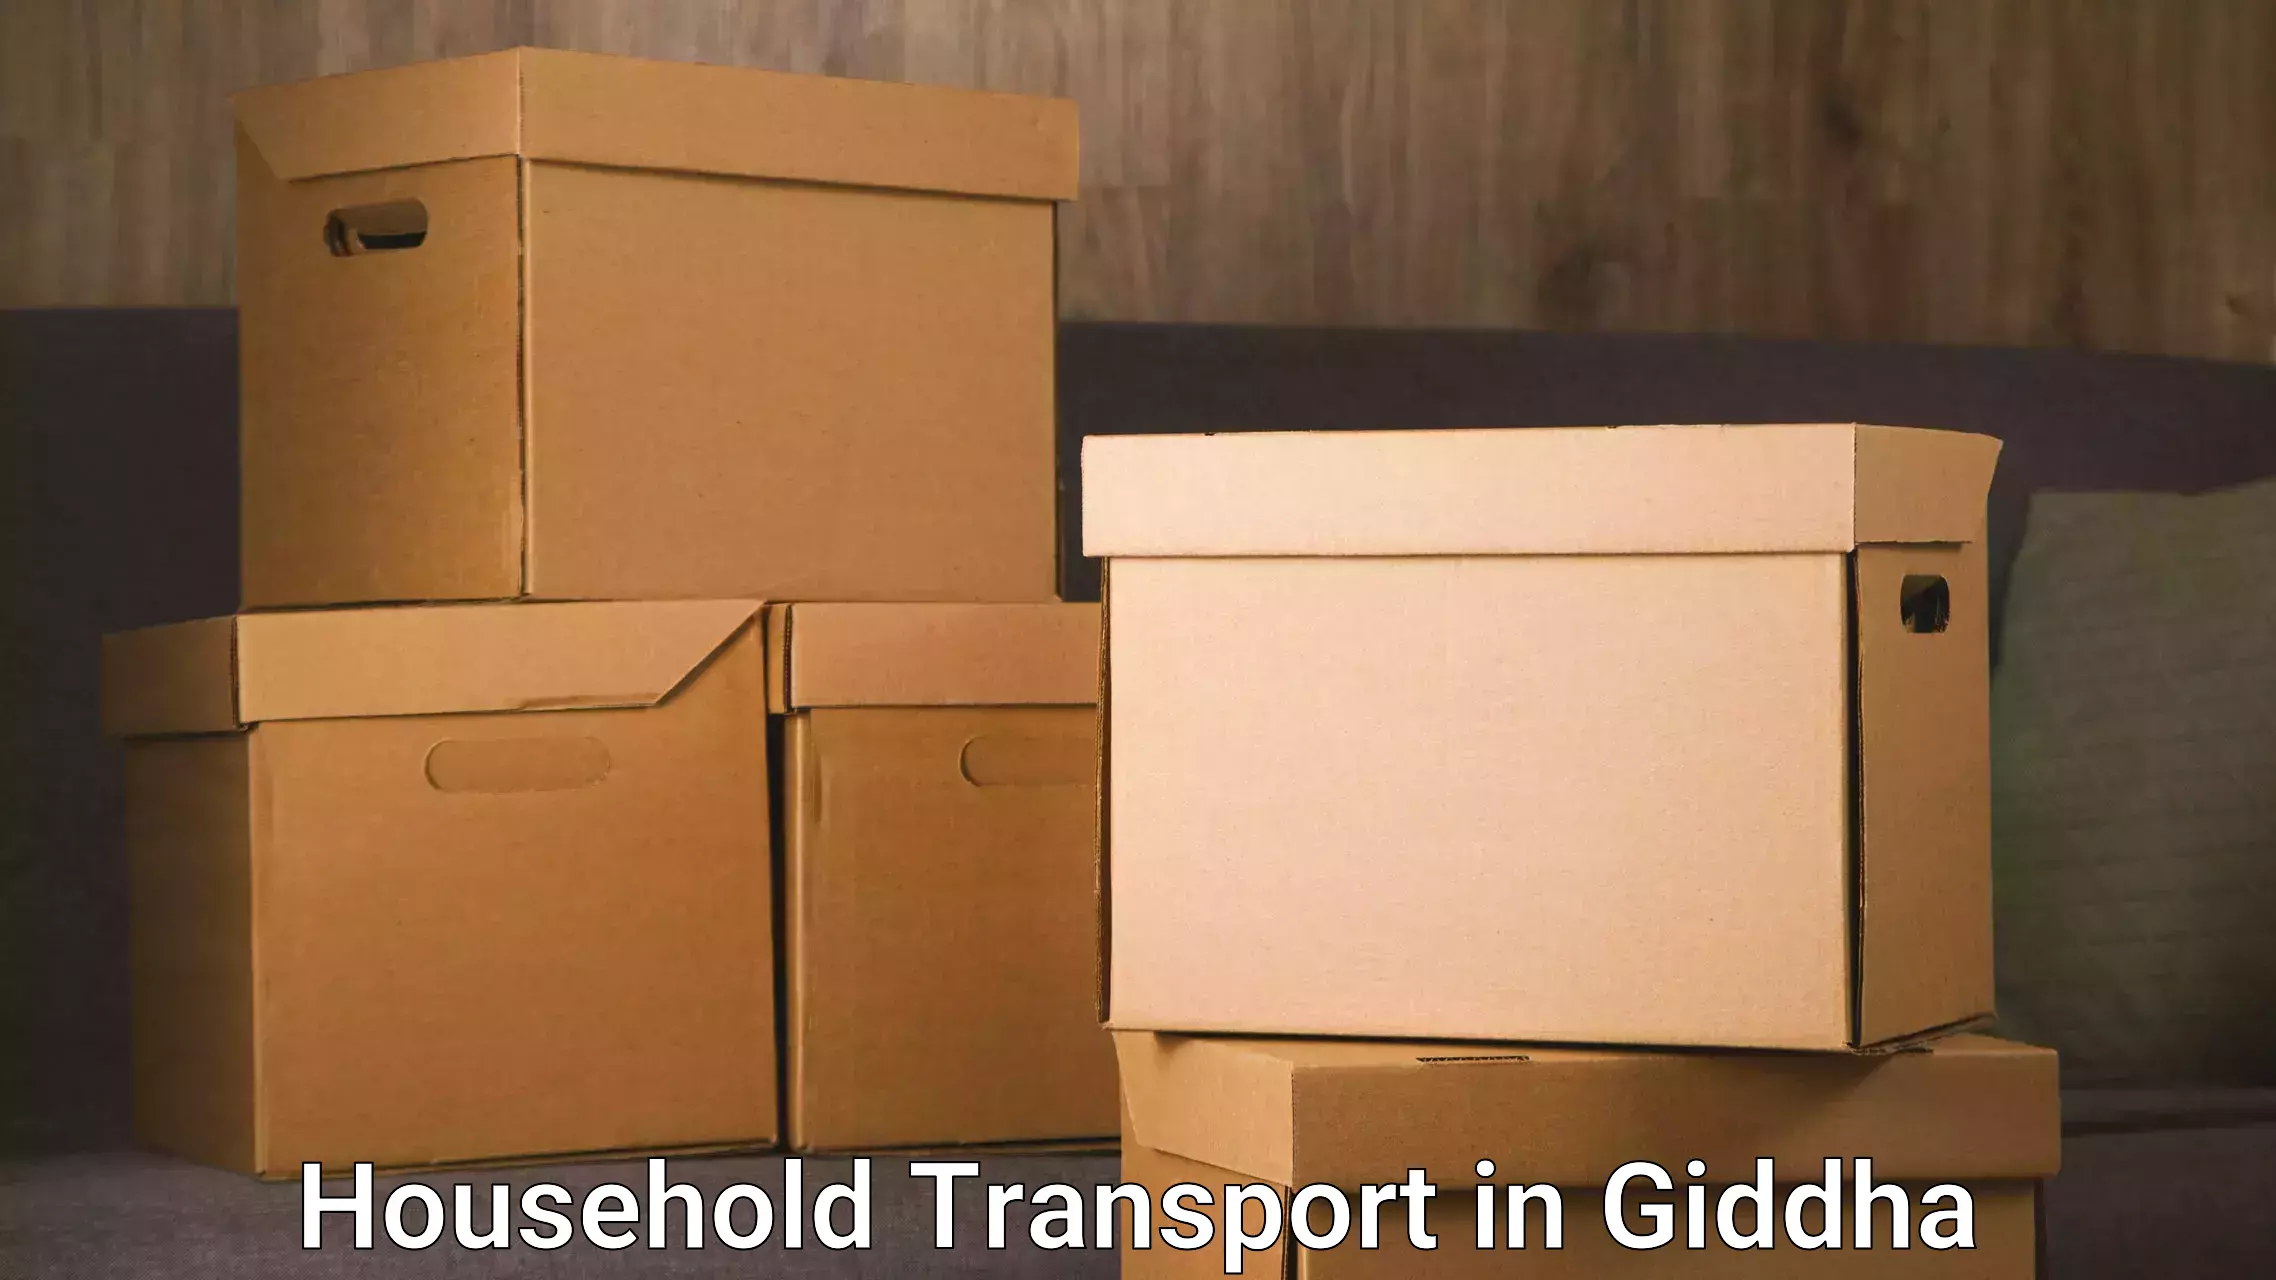 Home furniture relocation in Giddha